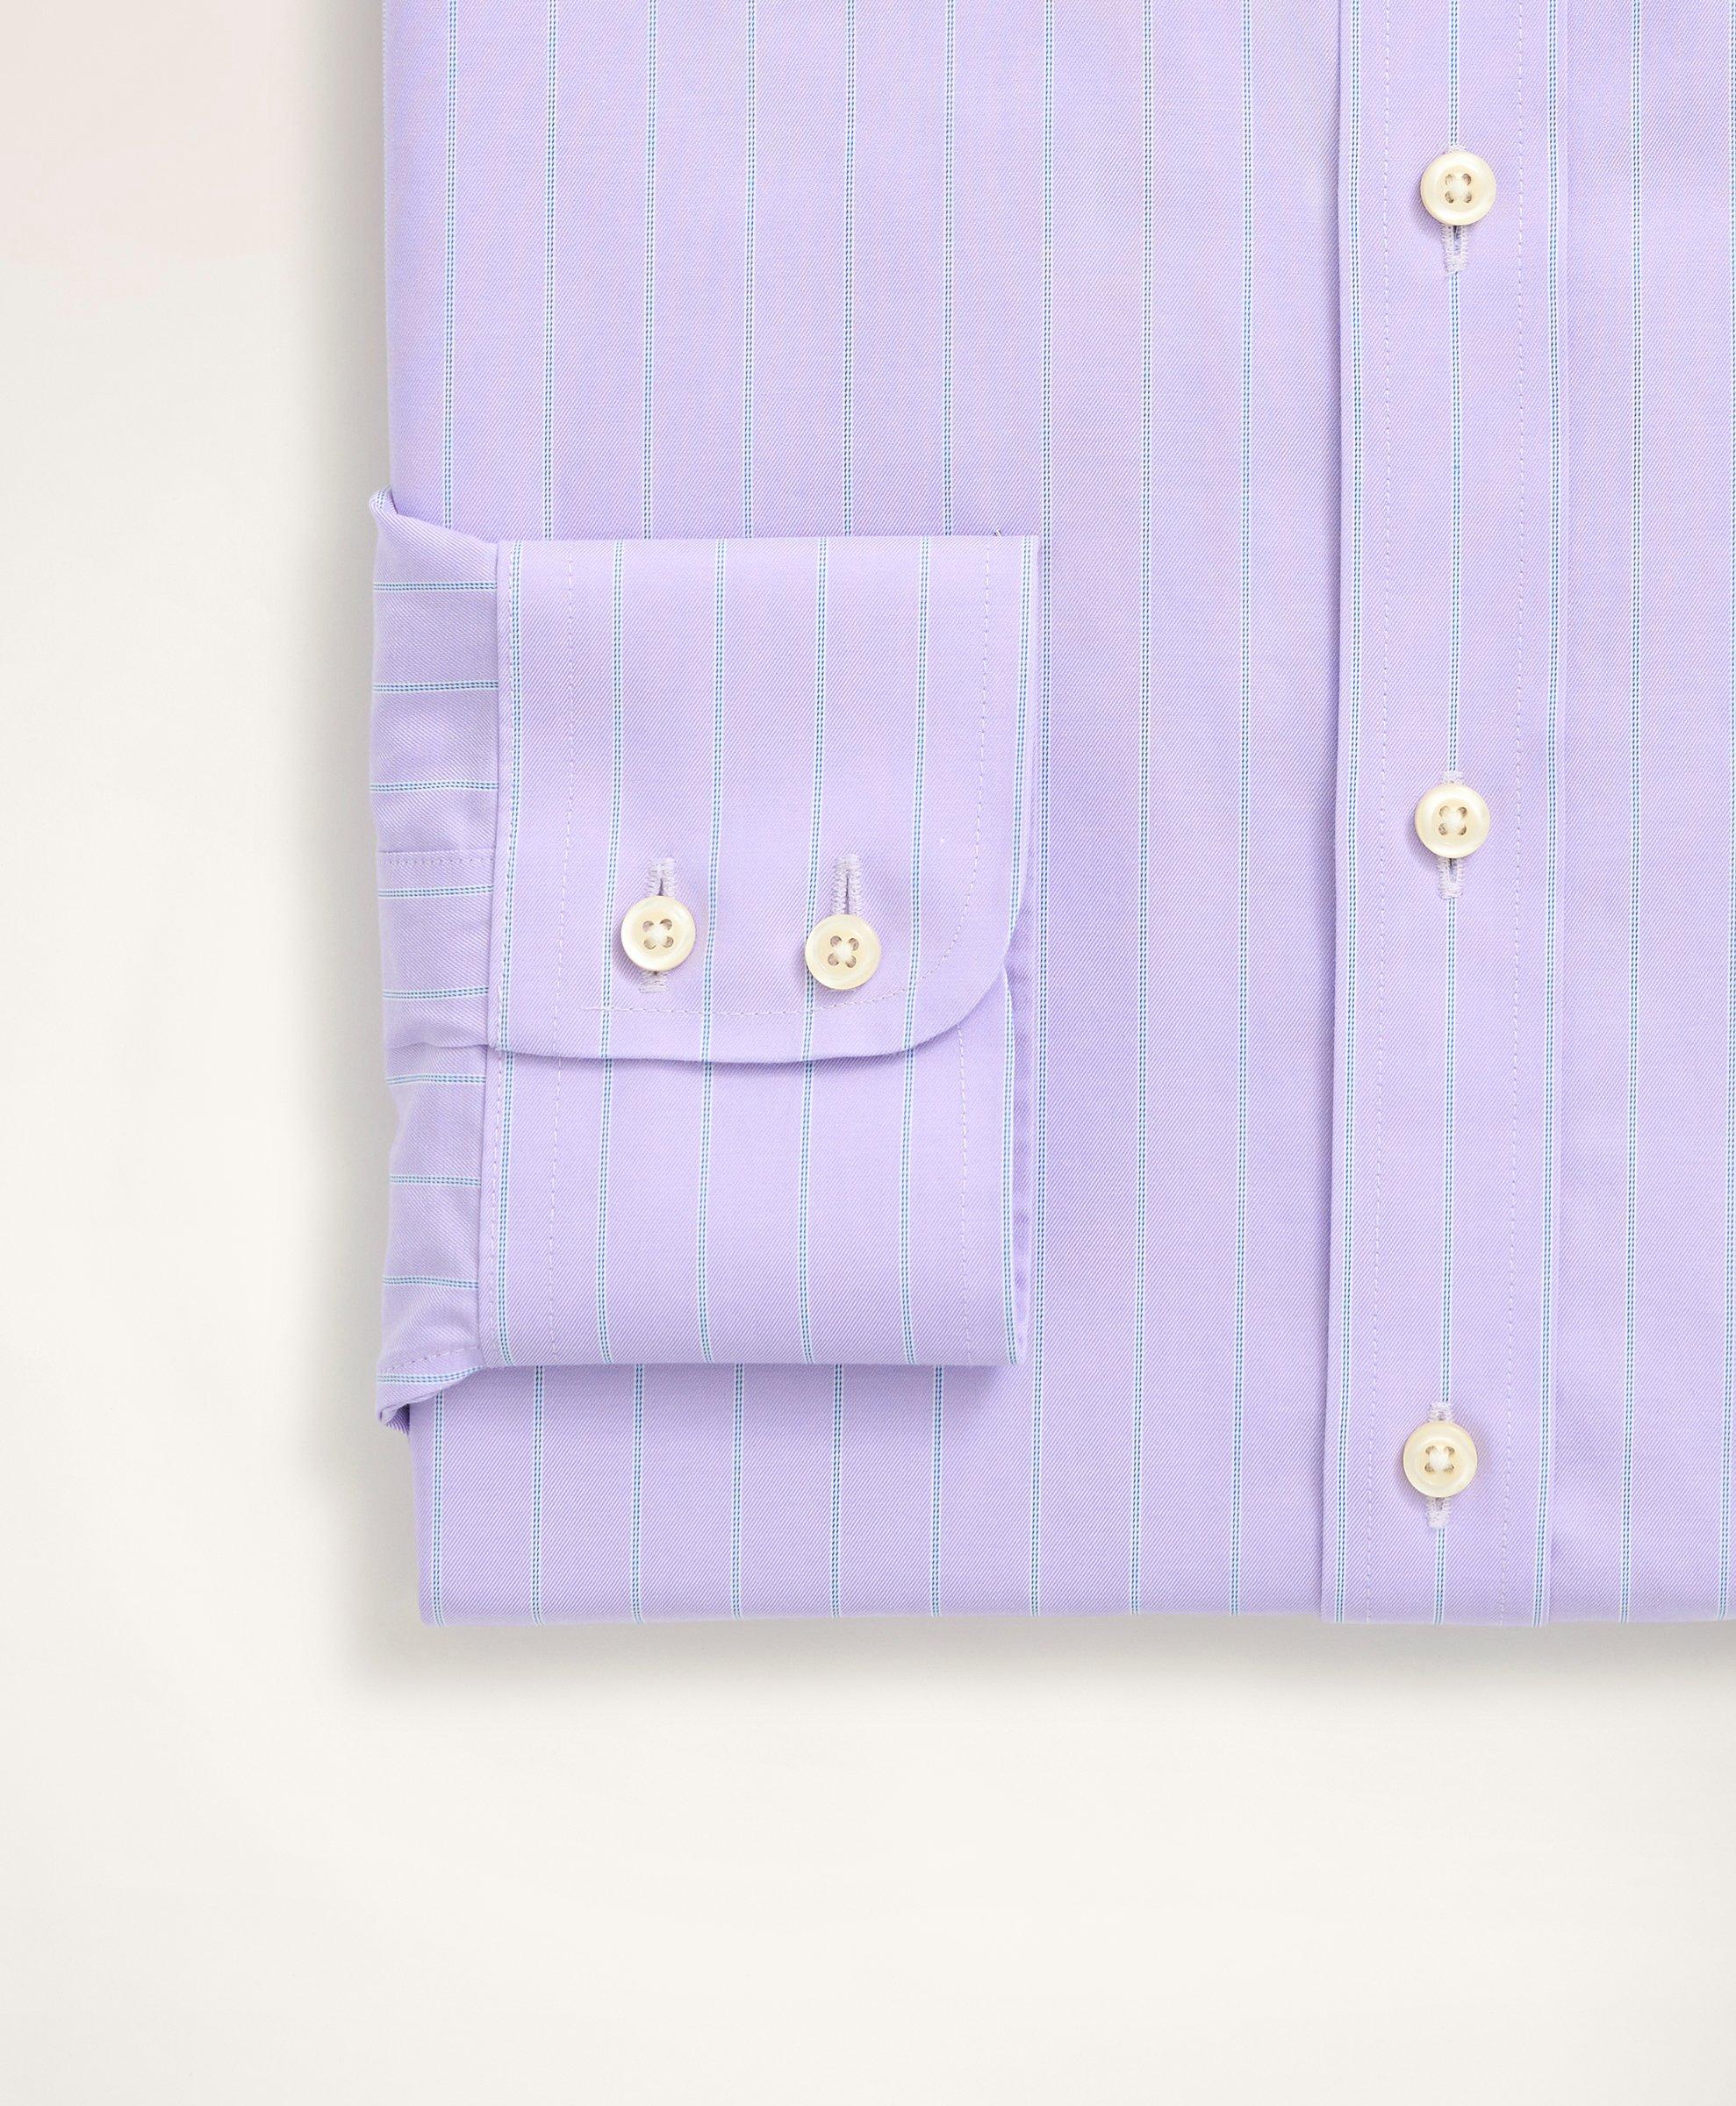 Madison Relaxed-Fit Dress Shirt, Non-Iron Contrast Ainsley Collar French  Cuff